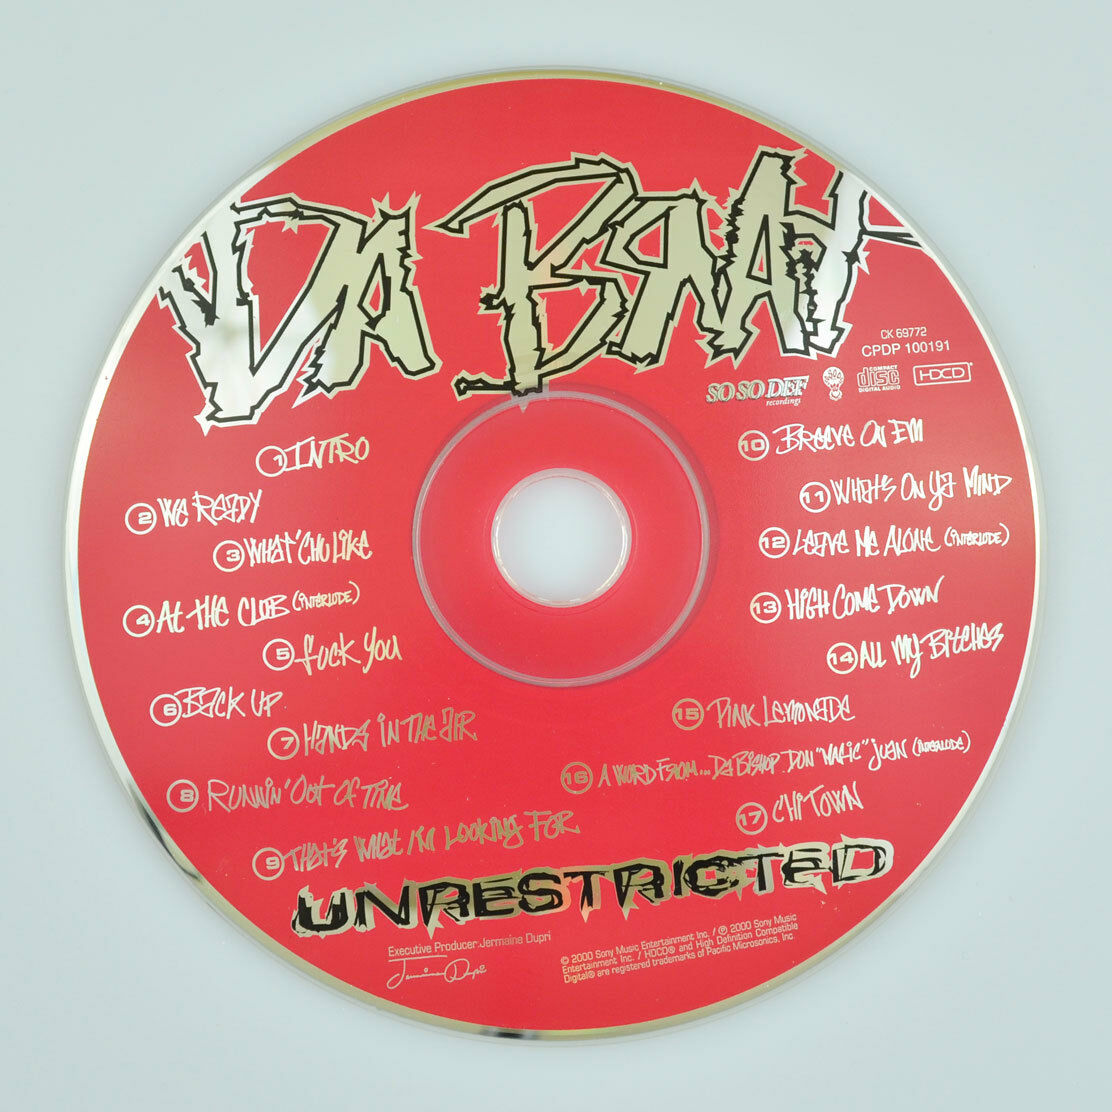 Unrestricted by Da Brat (CD, Apr-2000, Sony Music Distribution) DISC ONLY